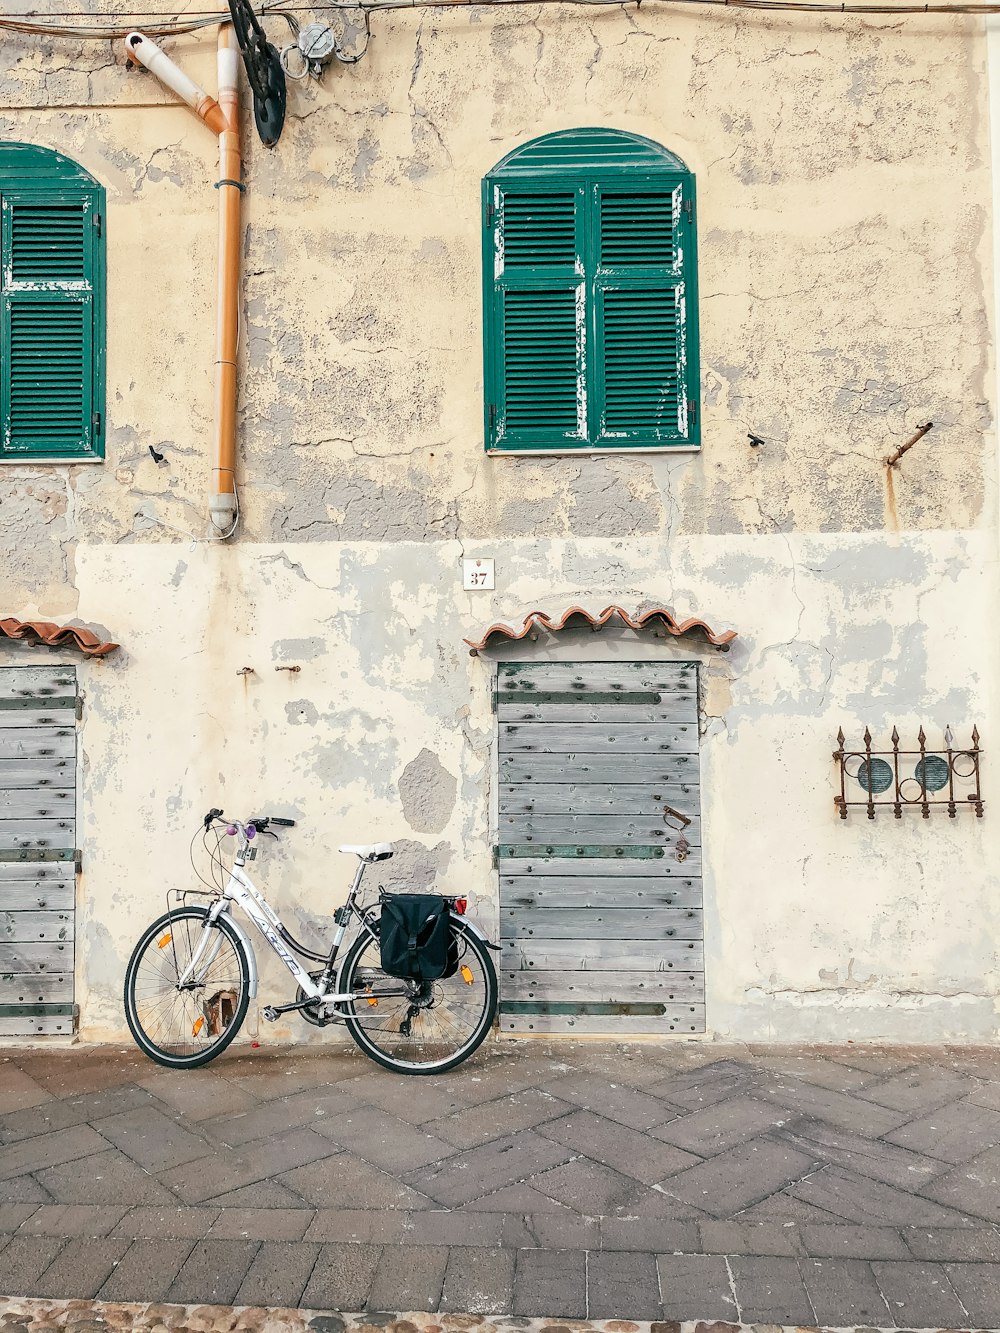 a bicycle parked in front of a building with green shutters